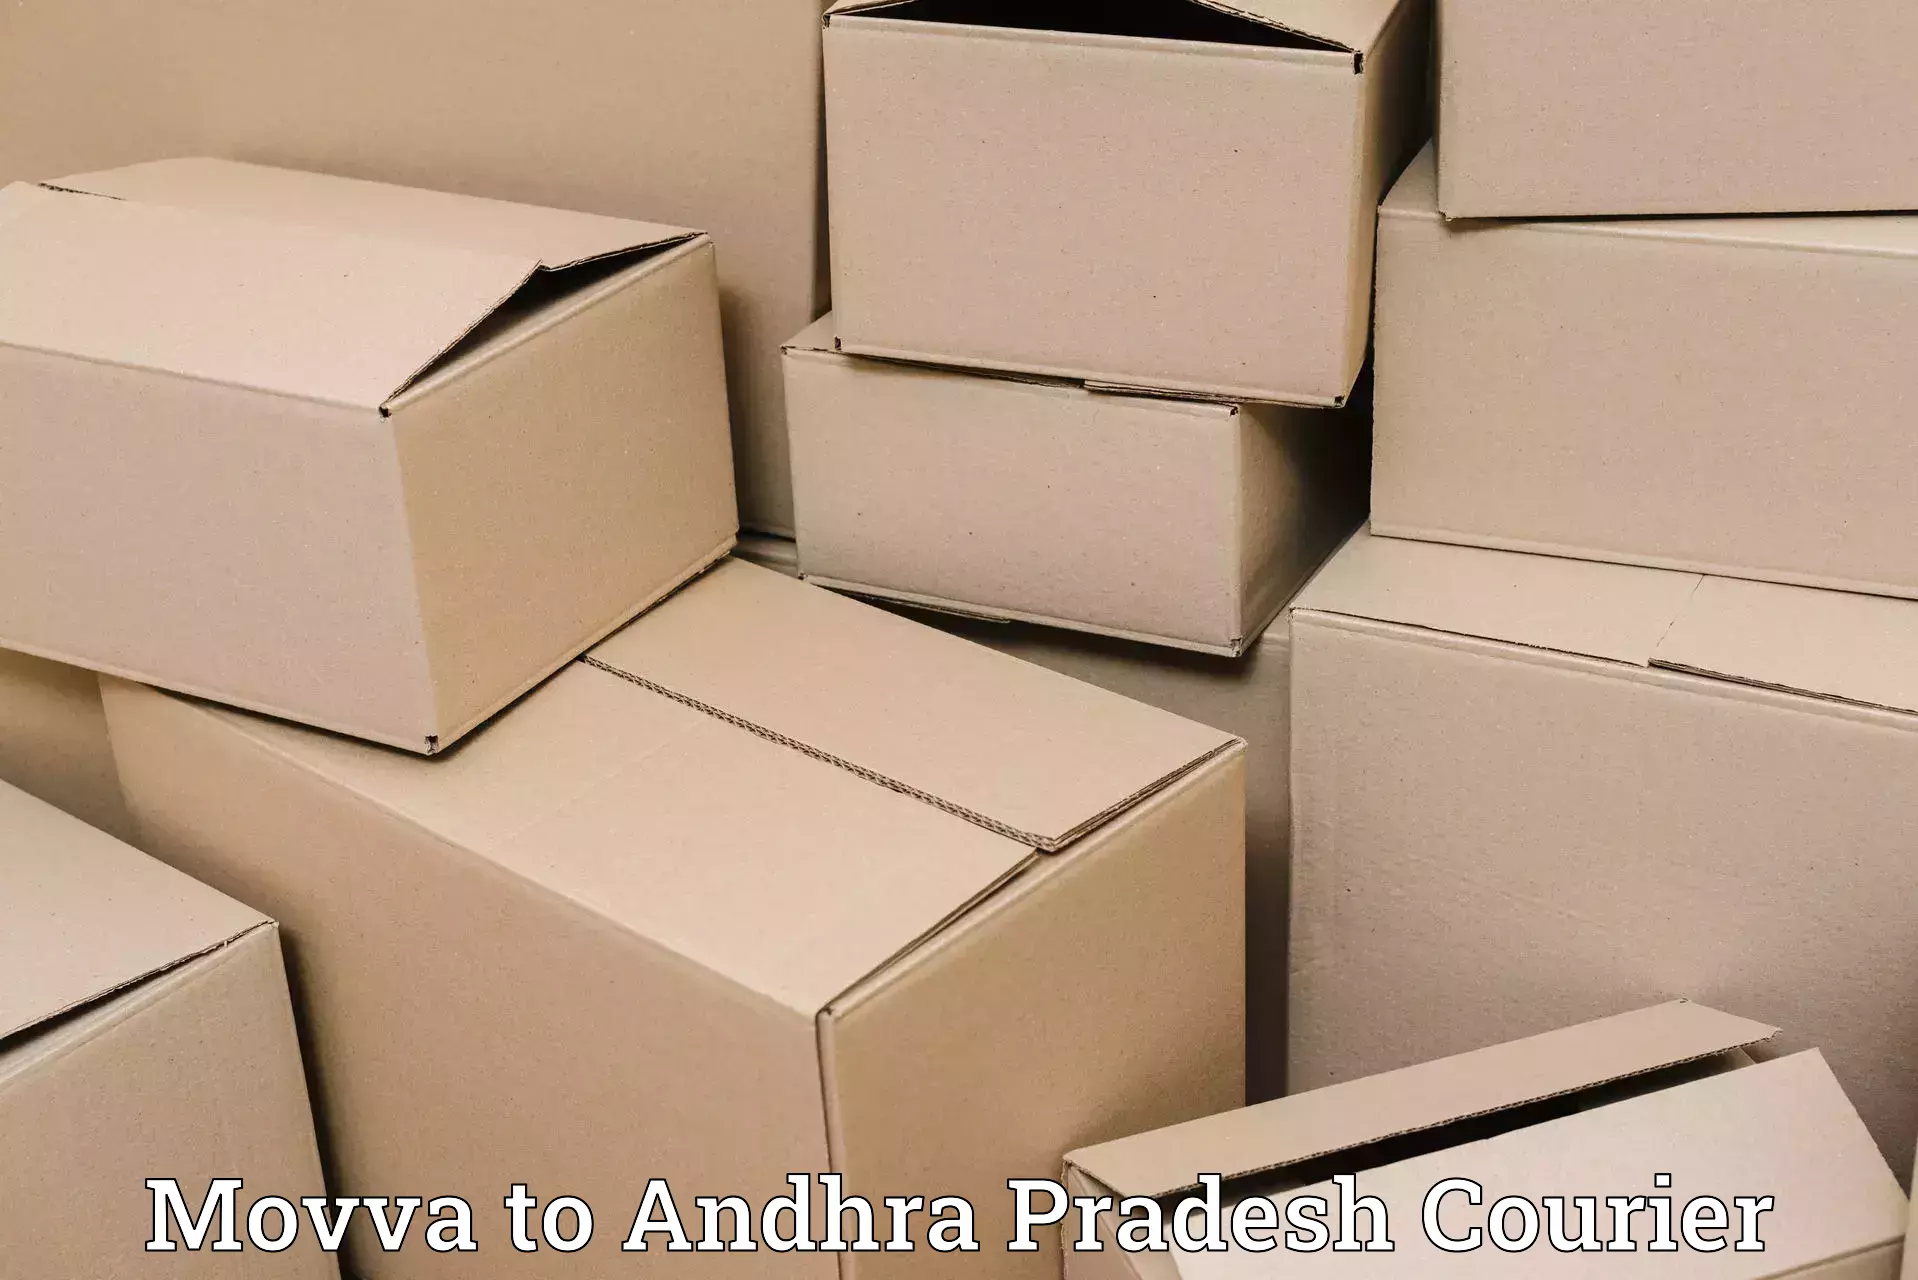 Automated parcel services Movva to Naupada